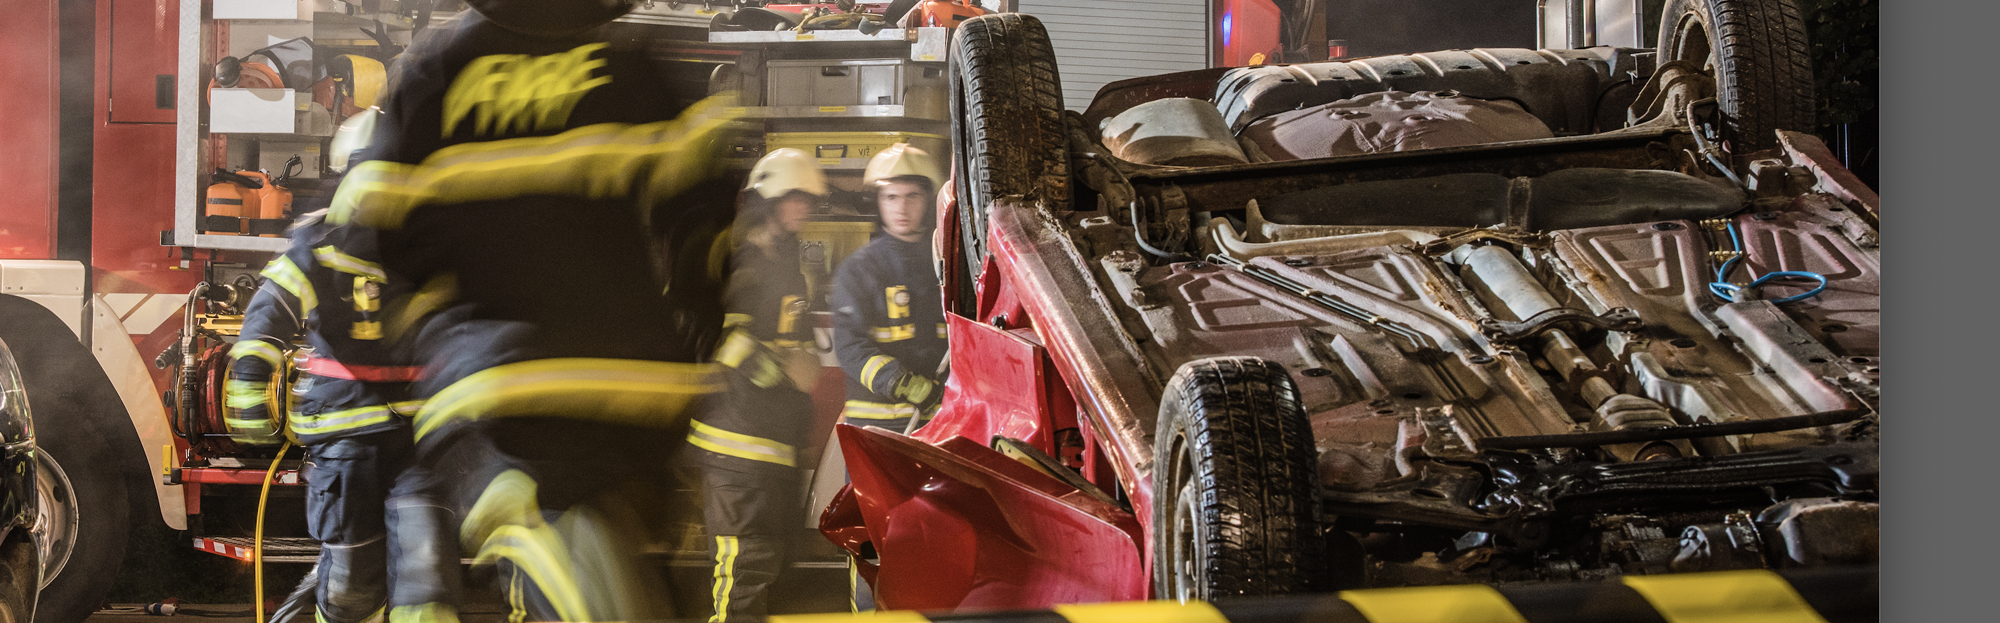 Firefighters and paramedics attend car after a rollover accident.